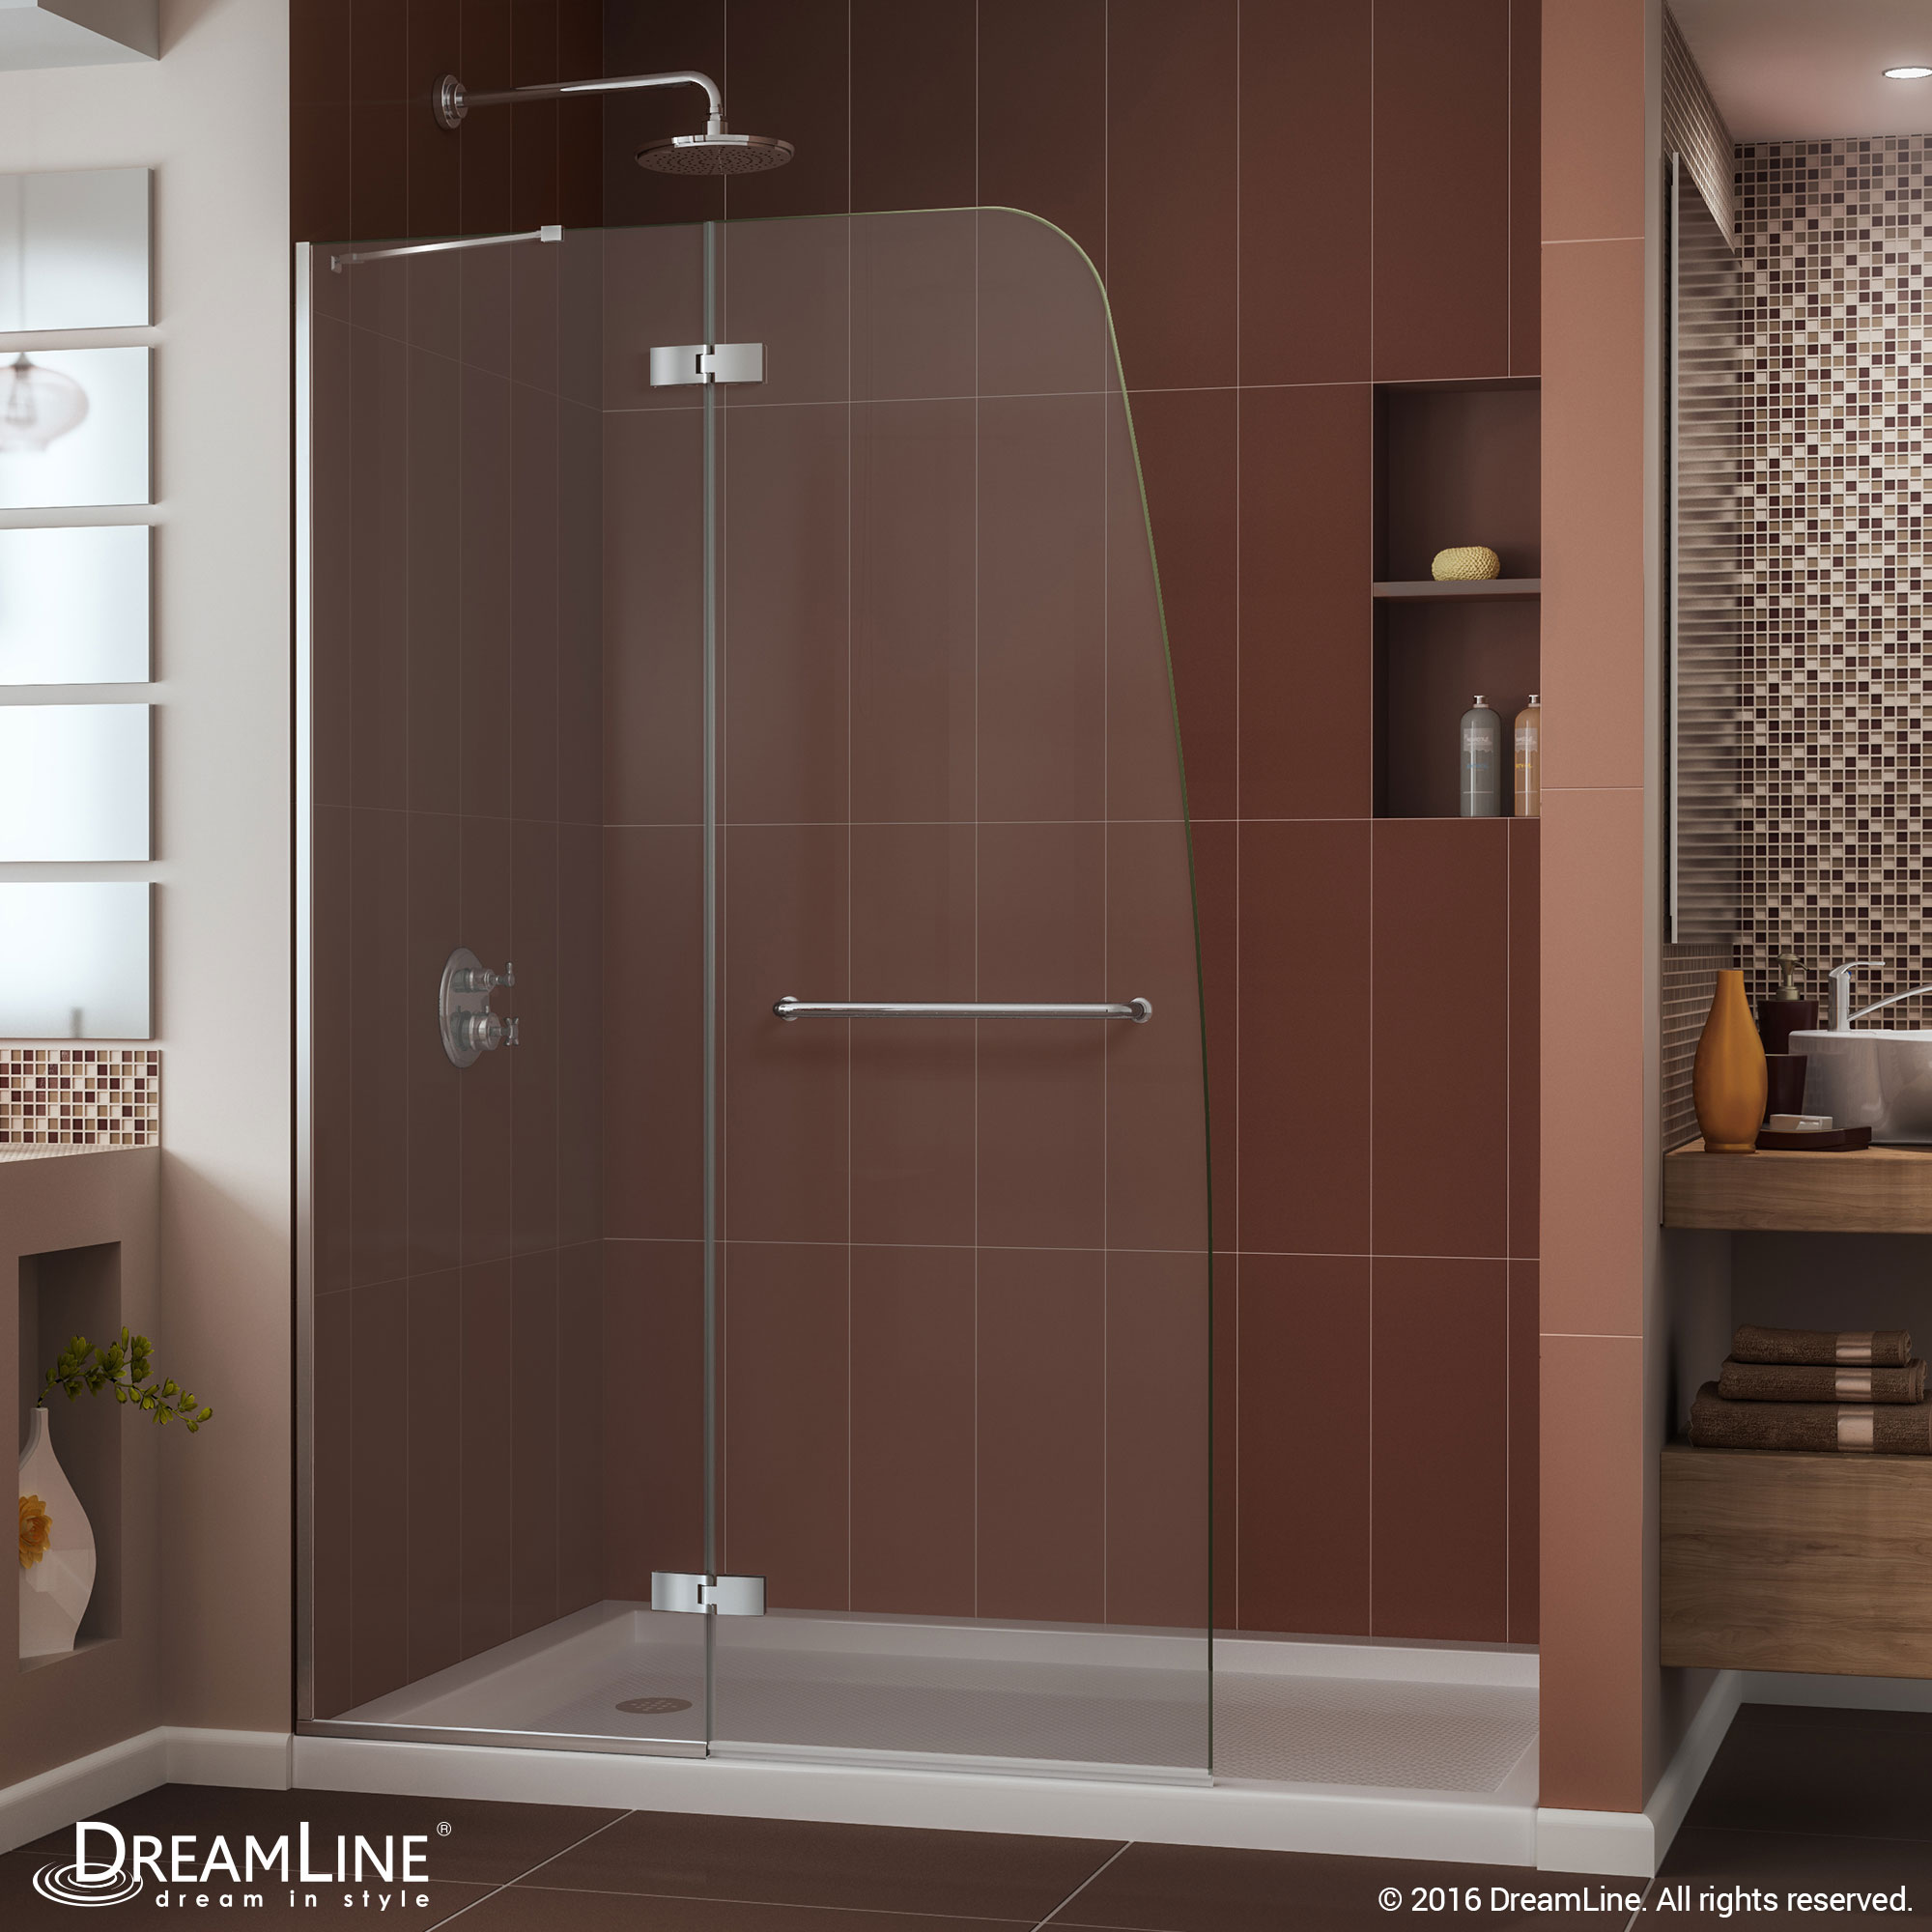 DreamLine Aqua Ultra 32 in. D x 60 in. W x 74 3/4 in. H Frameless Shower Door in Brushed Nickel and Left Drain Biscuit Base Kit